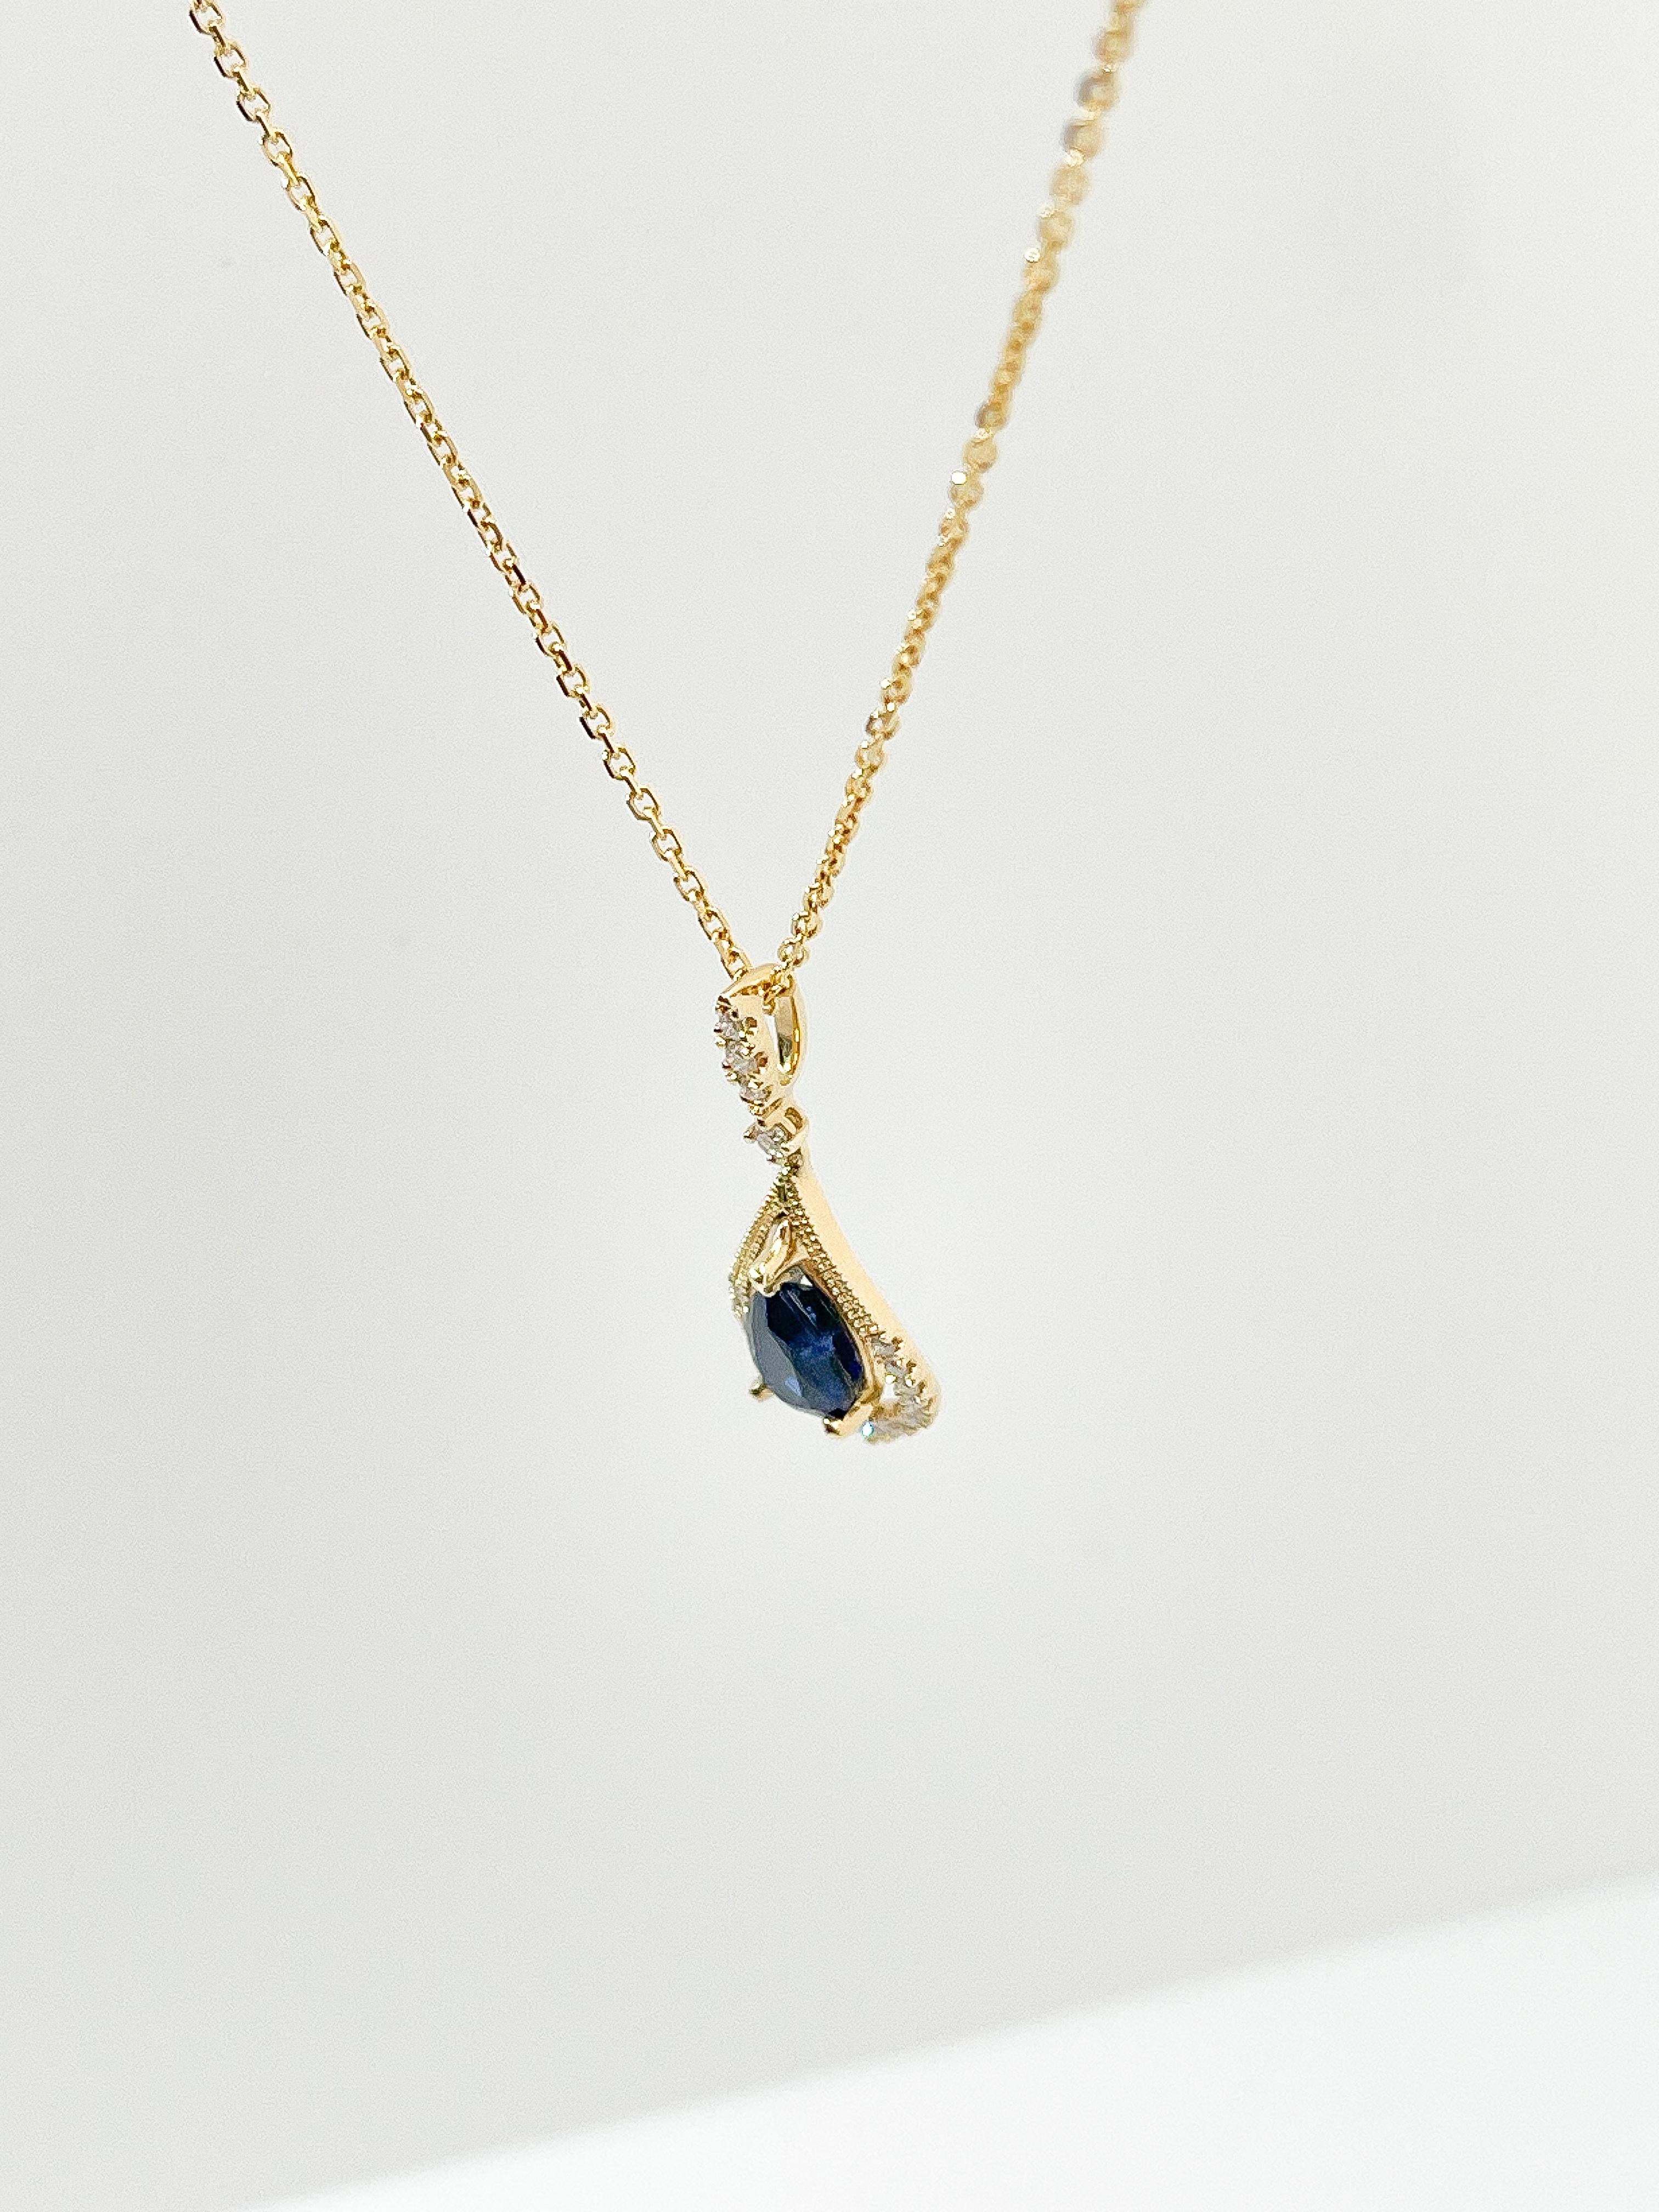 14K Yellow Gold 1 CT Pear Sapphire and Diamond Pendant Necklace  In Excellent Condition For Sale In Stuart, FL